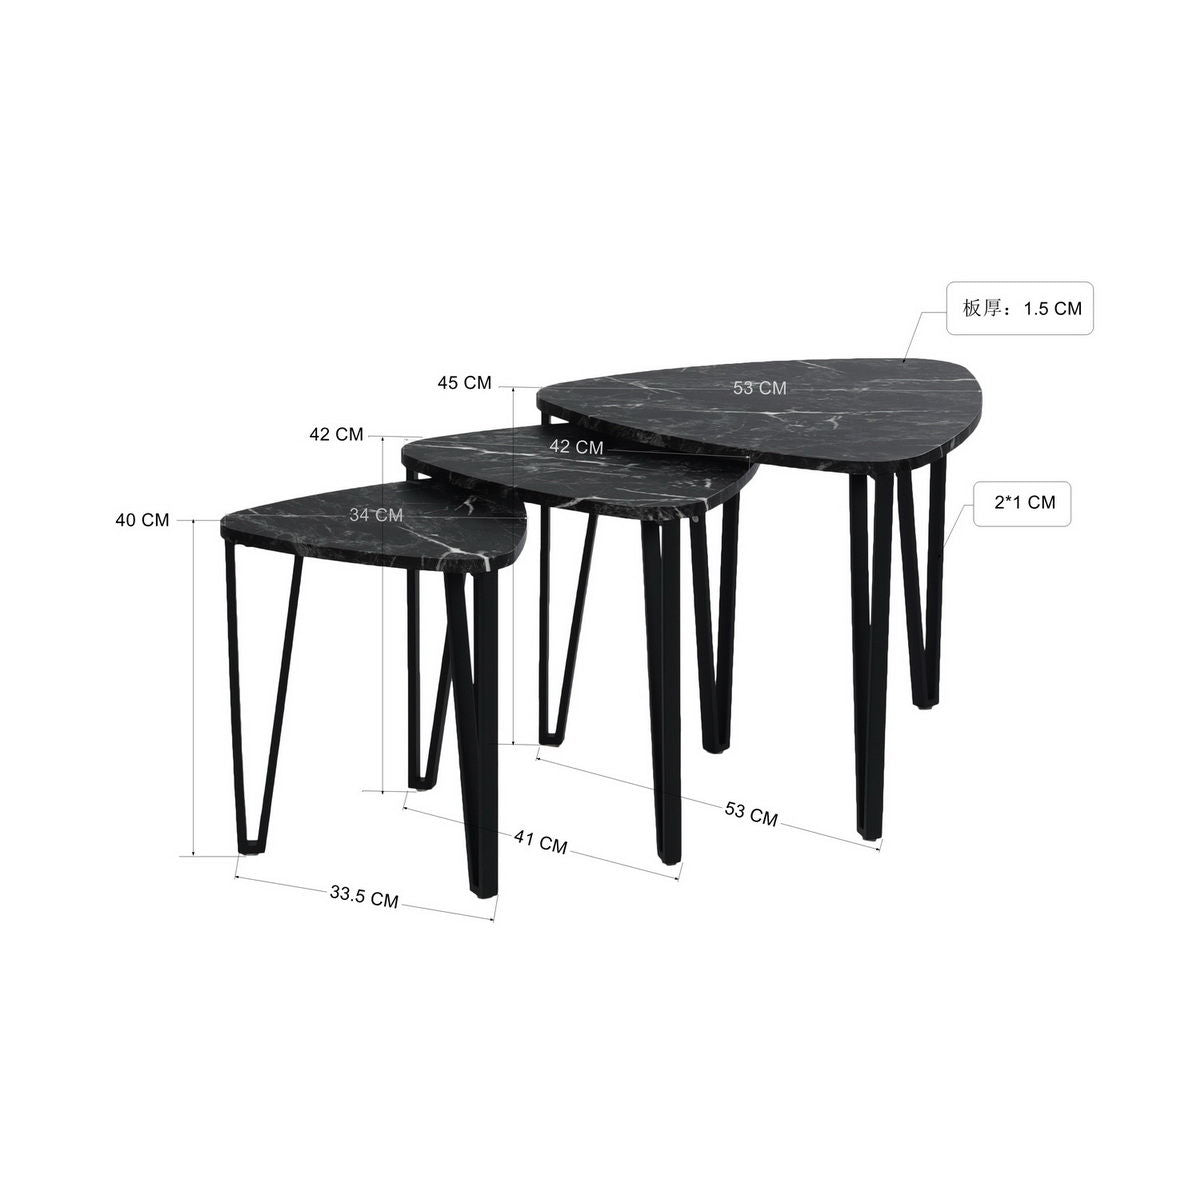 Nesting Coffee Table (Set of 3) End Tables For Living Room, Stacking Side Tables, Wood Look Accent Furniture With Metal Frame - Black Marble